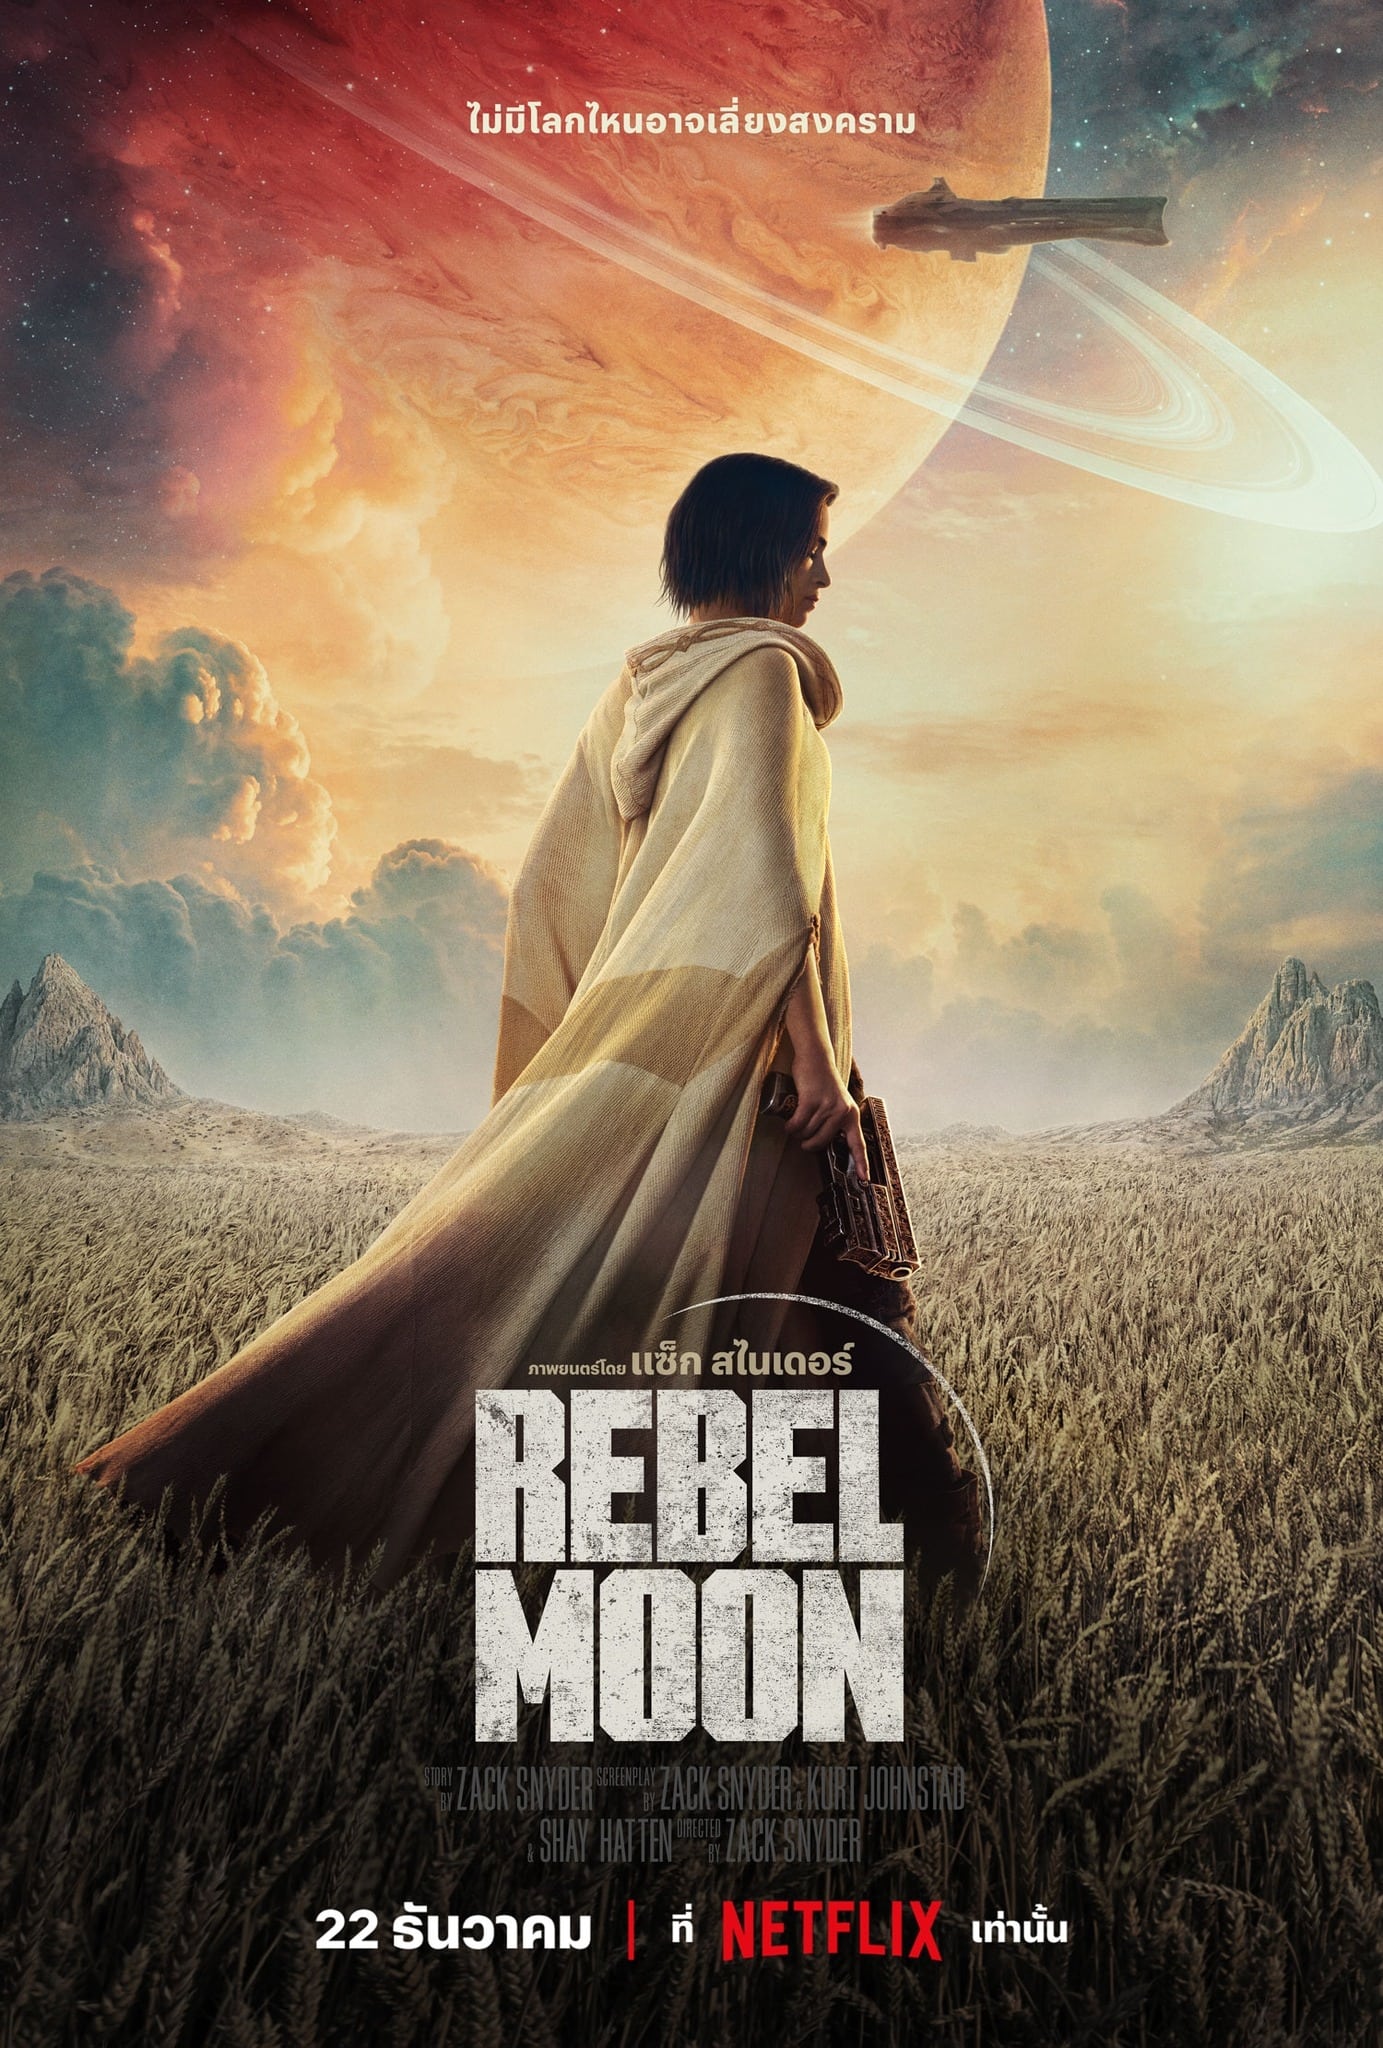 Poster for the movie "Rebel Moon"